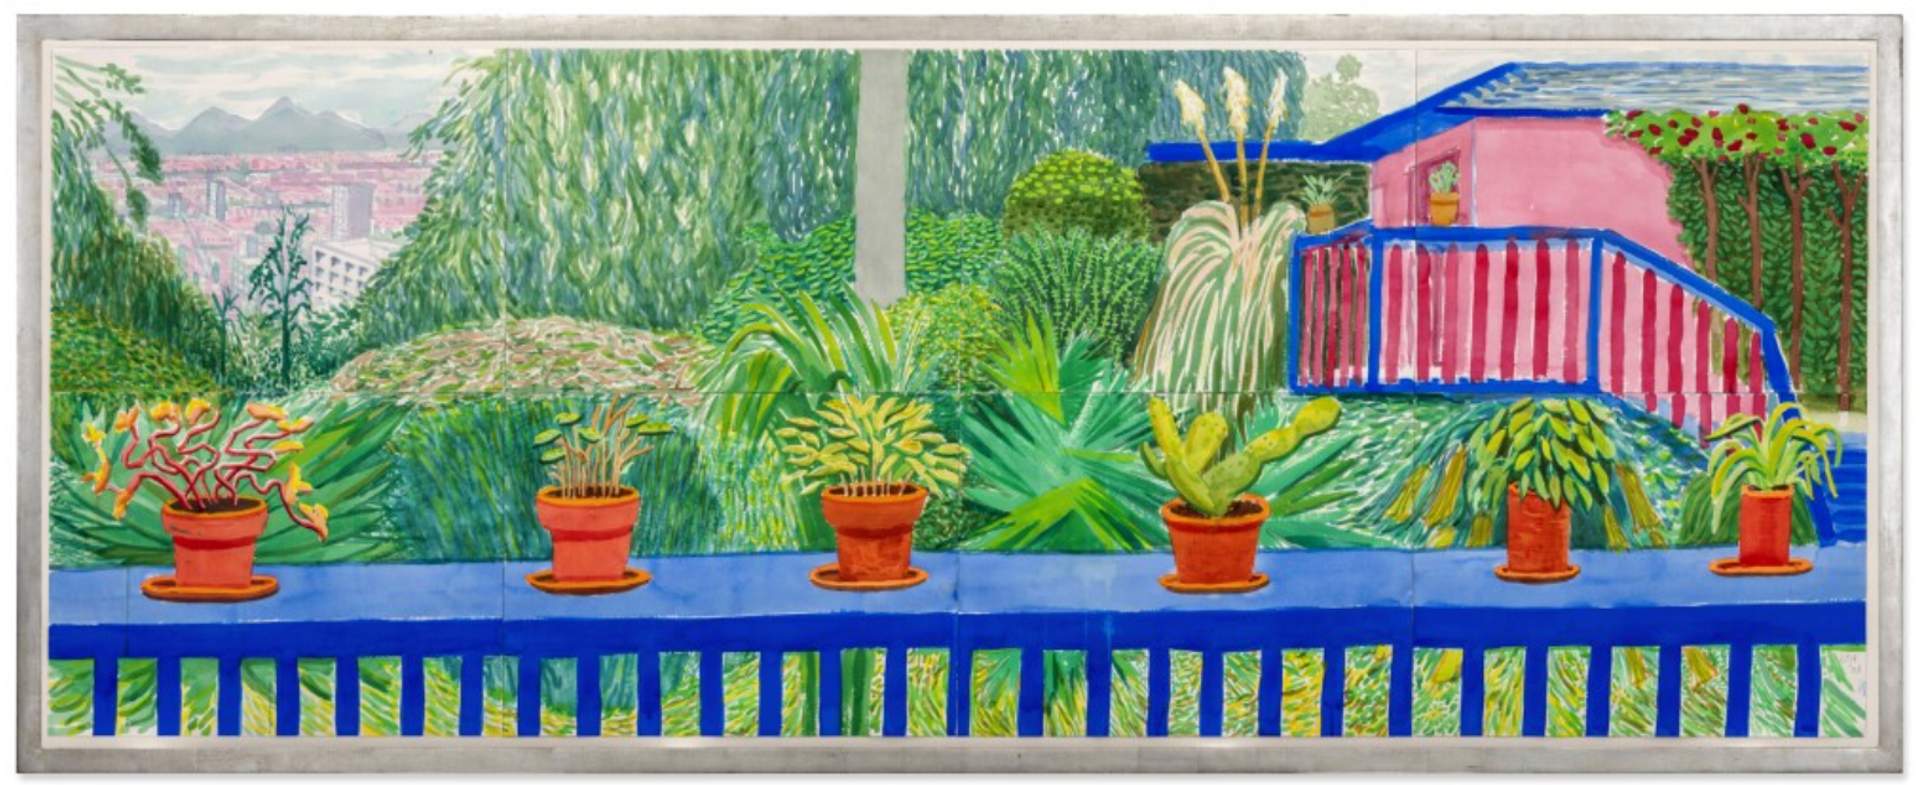 View From Terrace III by David Hockney - Sotheby's 2023